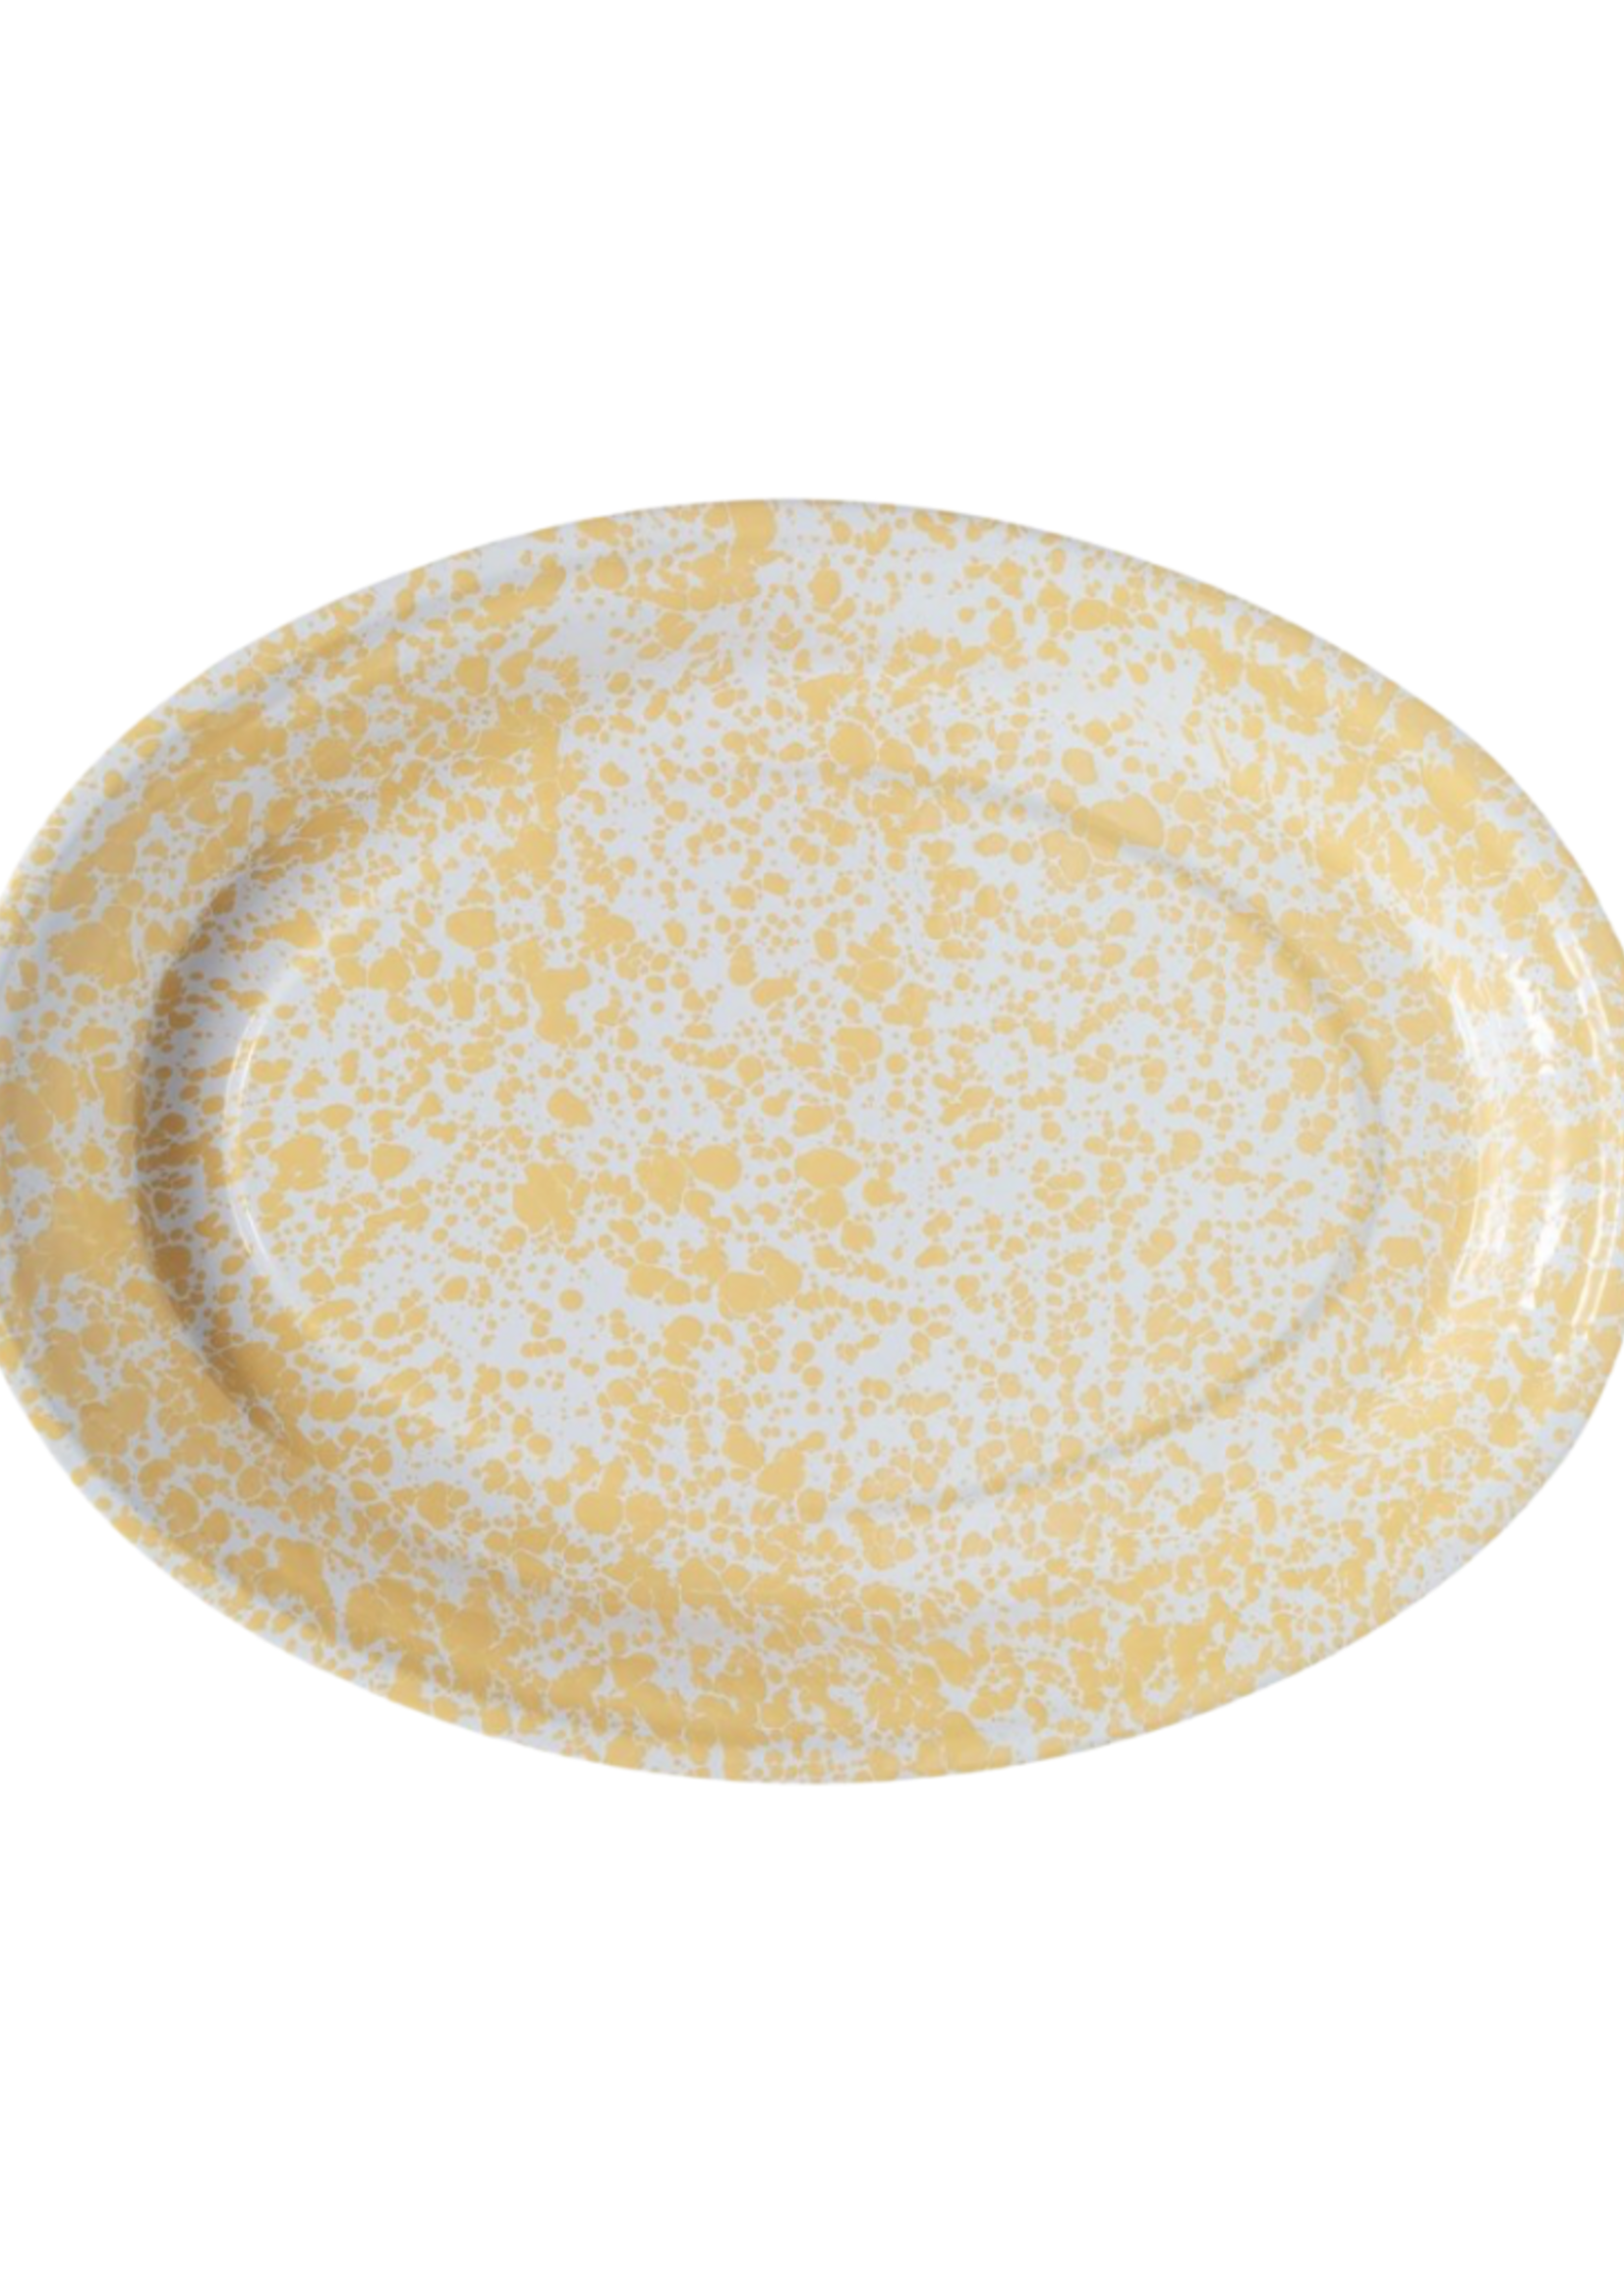 Splatter Oval Tray // Yellow Marble